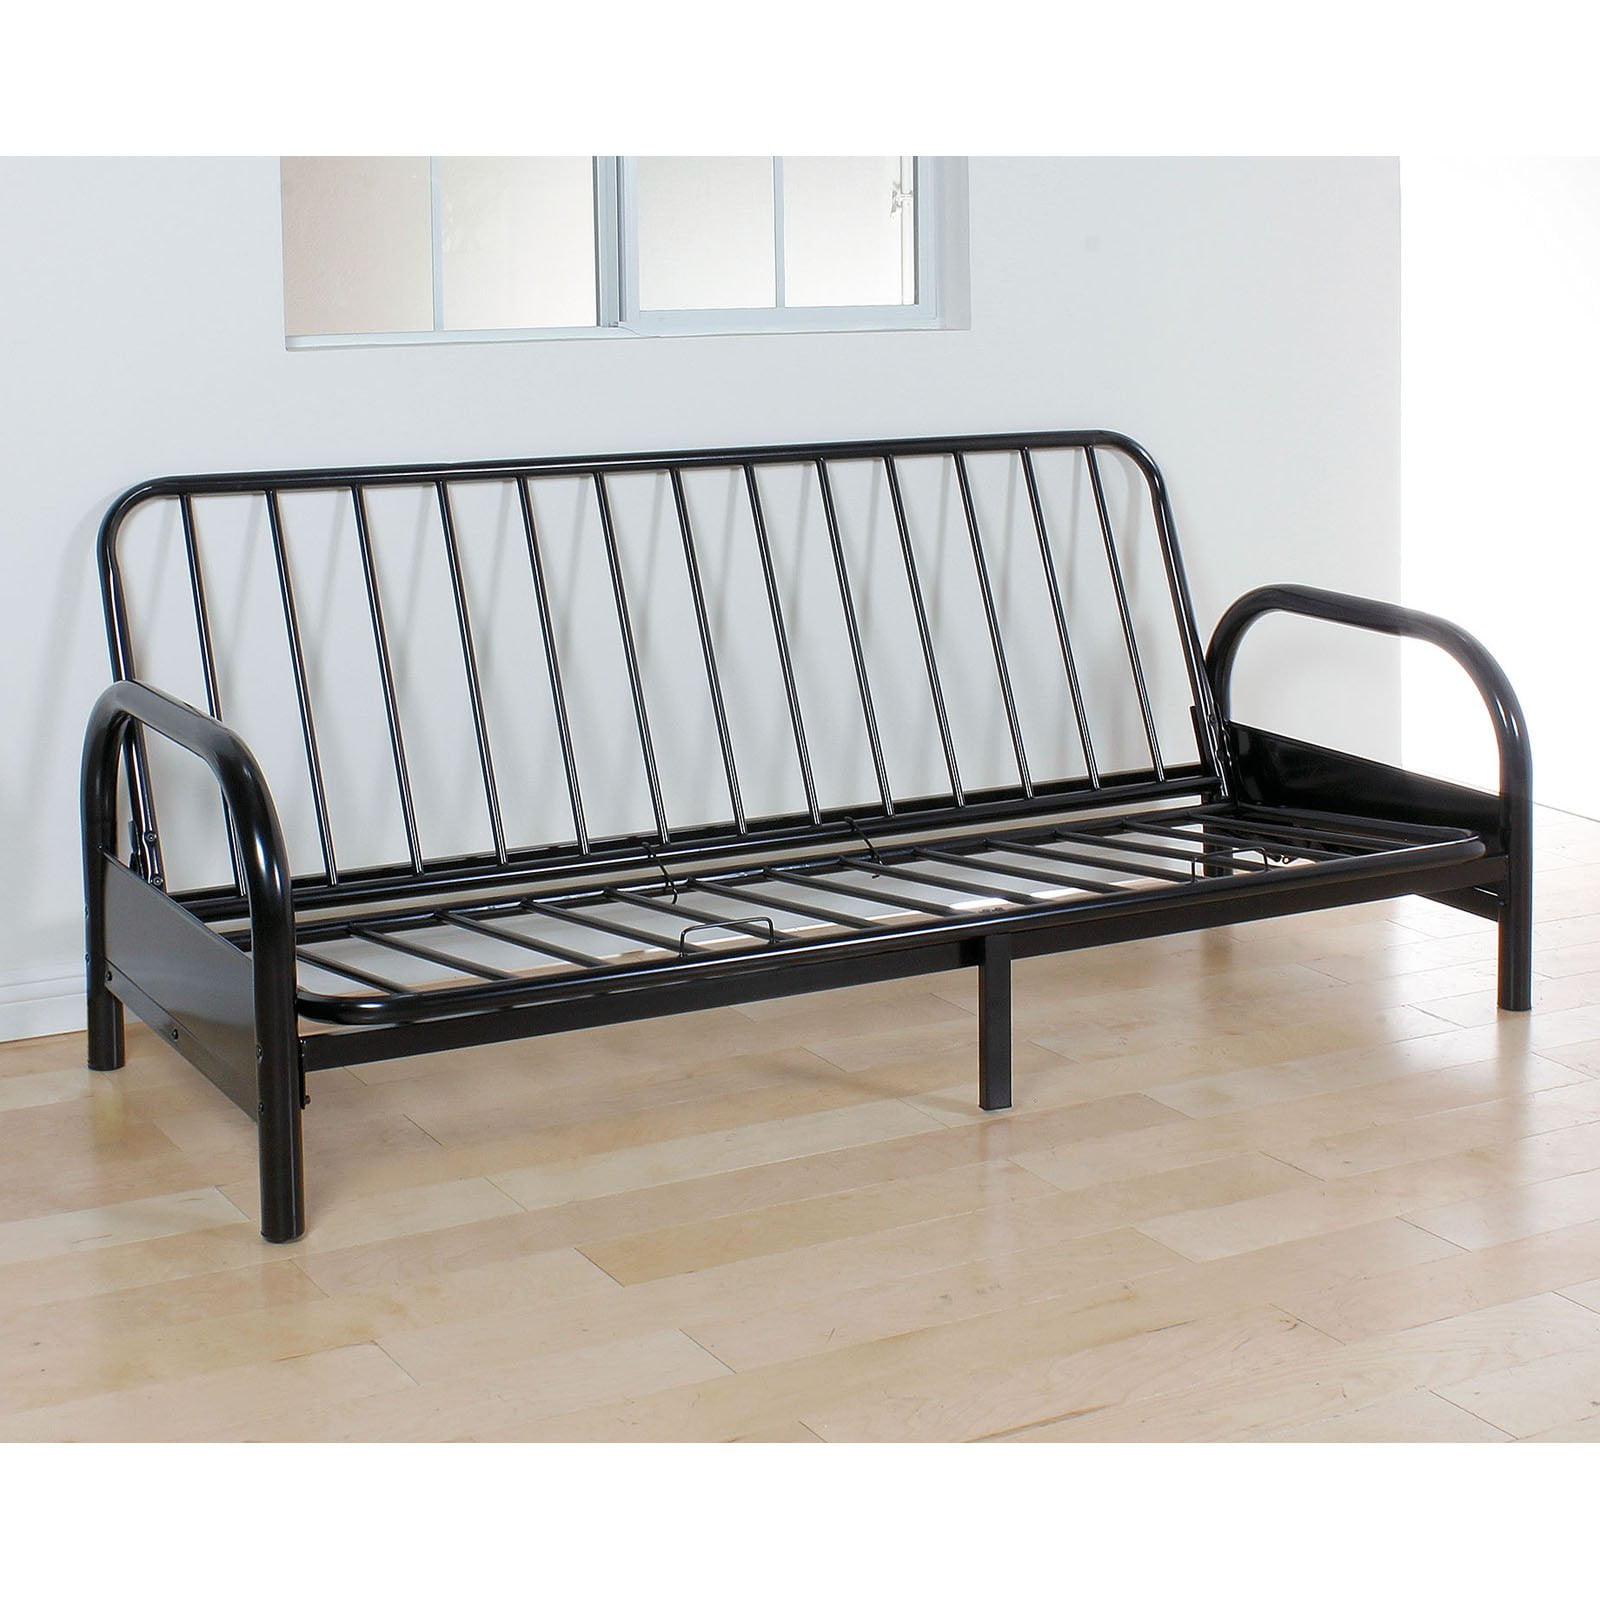 Picture of Acme Furniture Industry 02172BK Alfonso Adjustable Sofa Frame with Metal Construction, Black